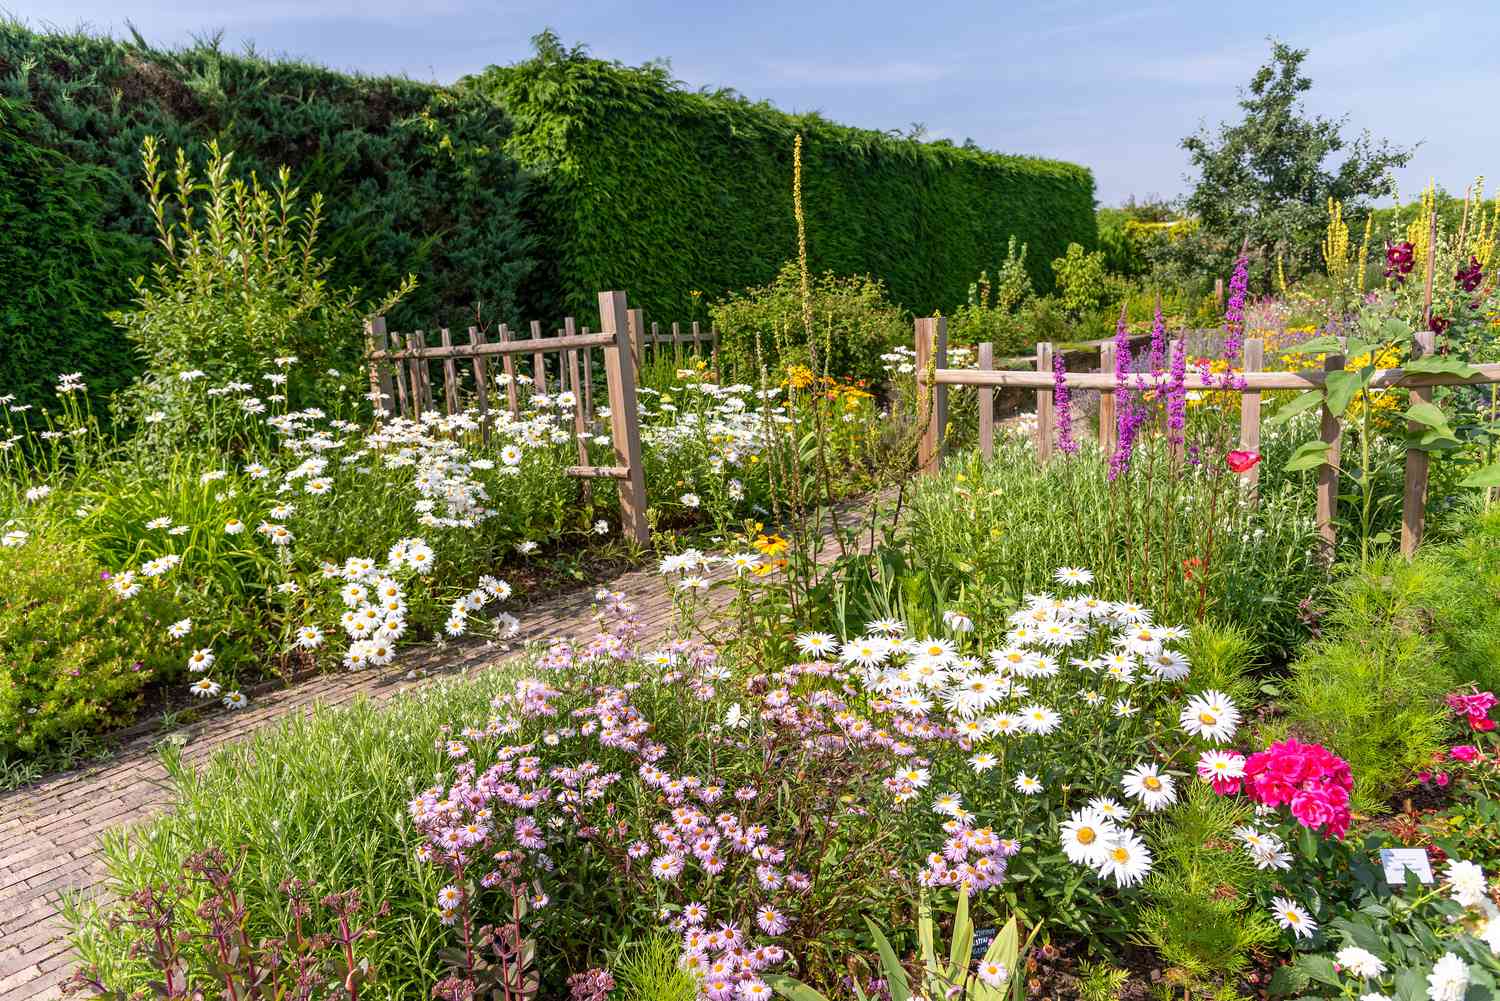 The Ultimate Guide To Successfully Planting A Wildflower Garden From Seed